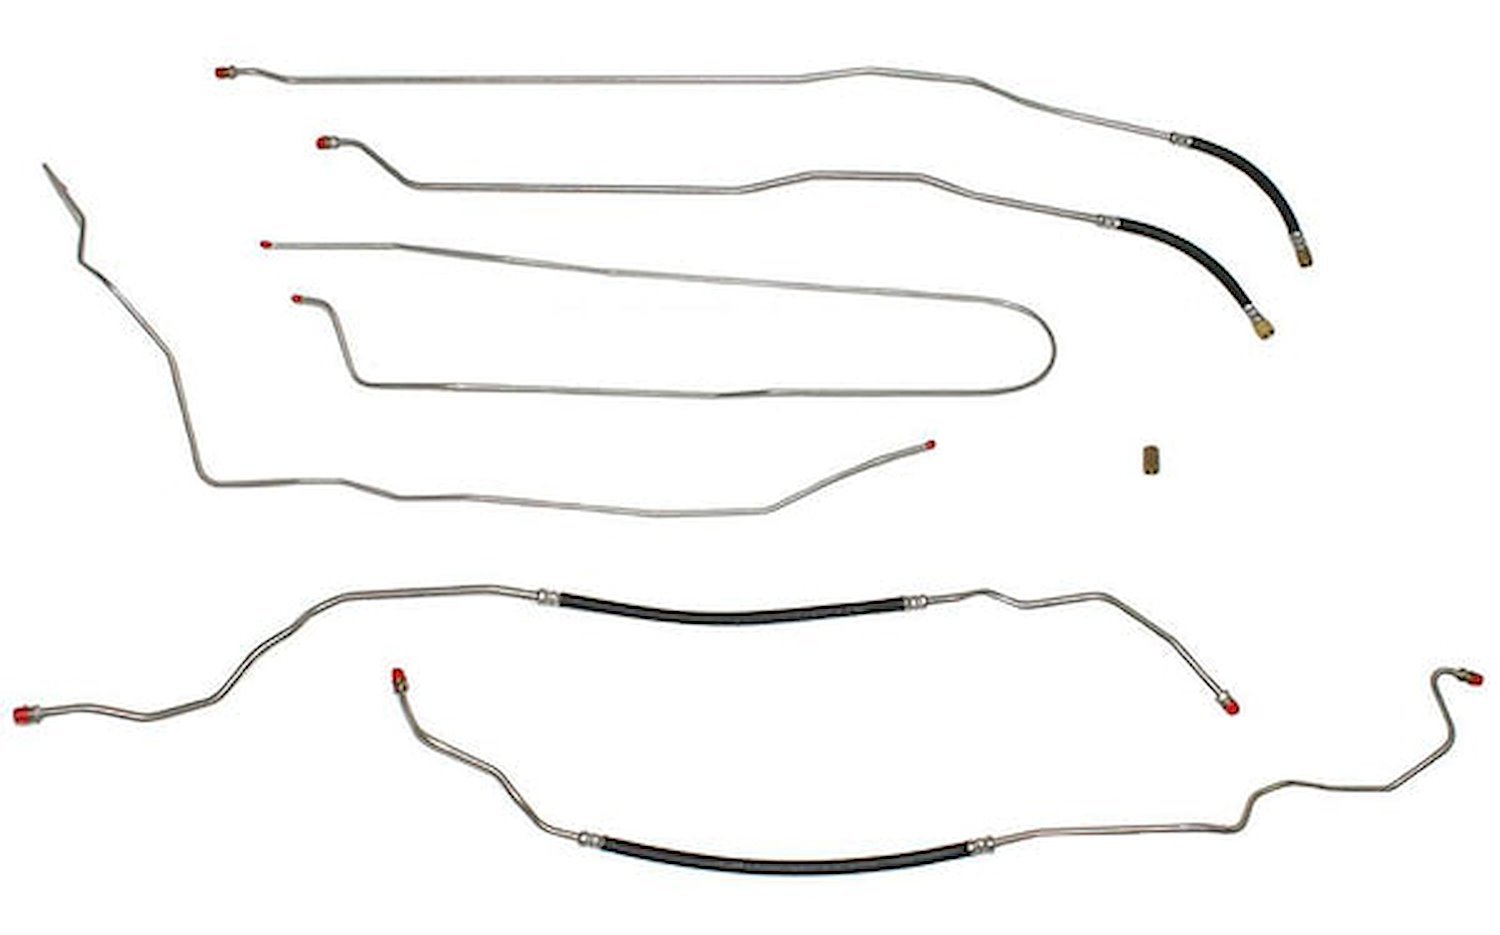 Complete Fuel Line Kit for 1996-1998 GM 1500 Extended Cab/Short Bed Truck w/V8 Engine [Stainless Steel]